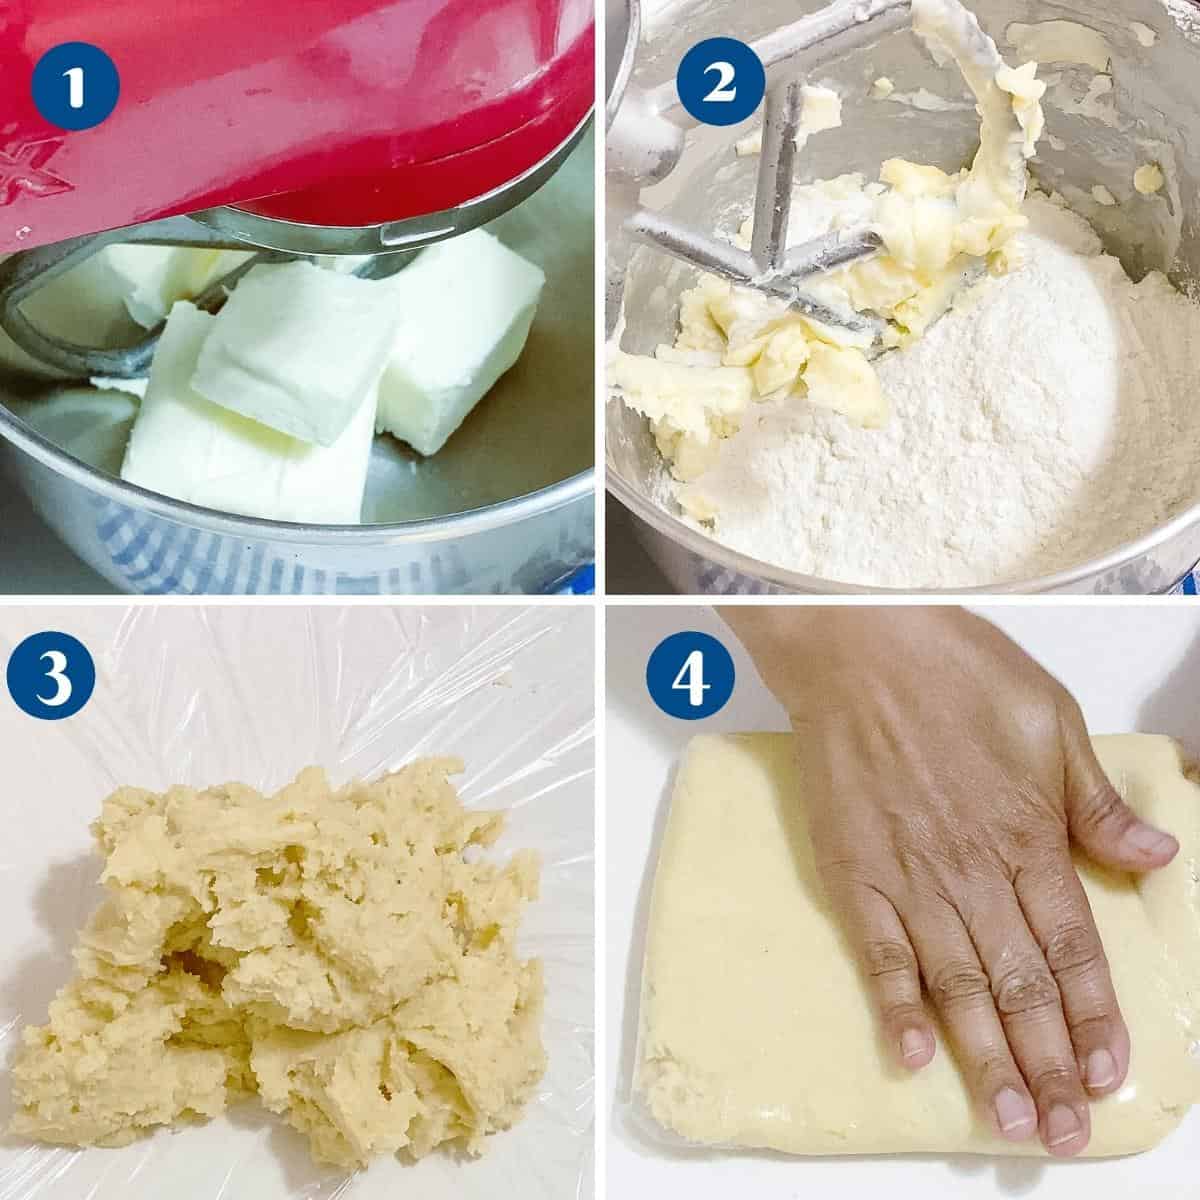 Progress pictures making the shortcrust pastry dough.